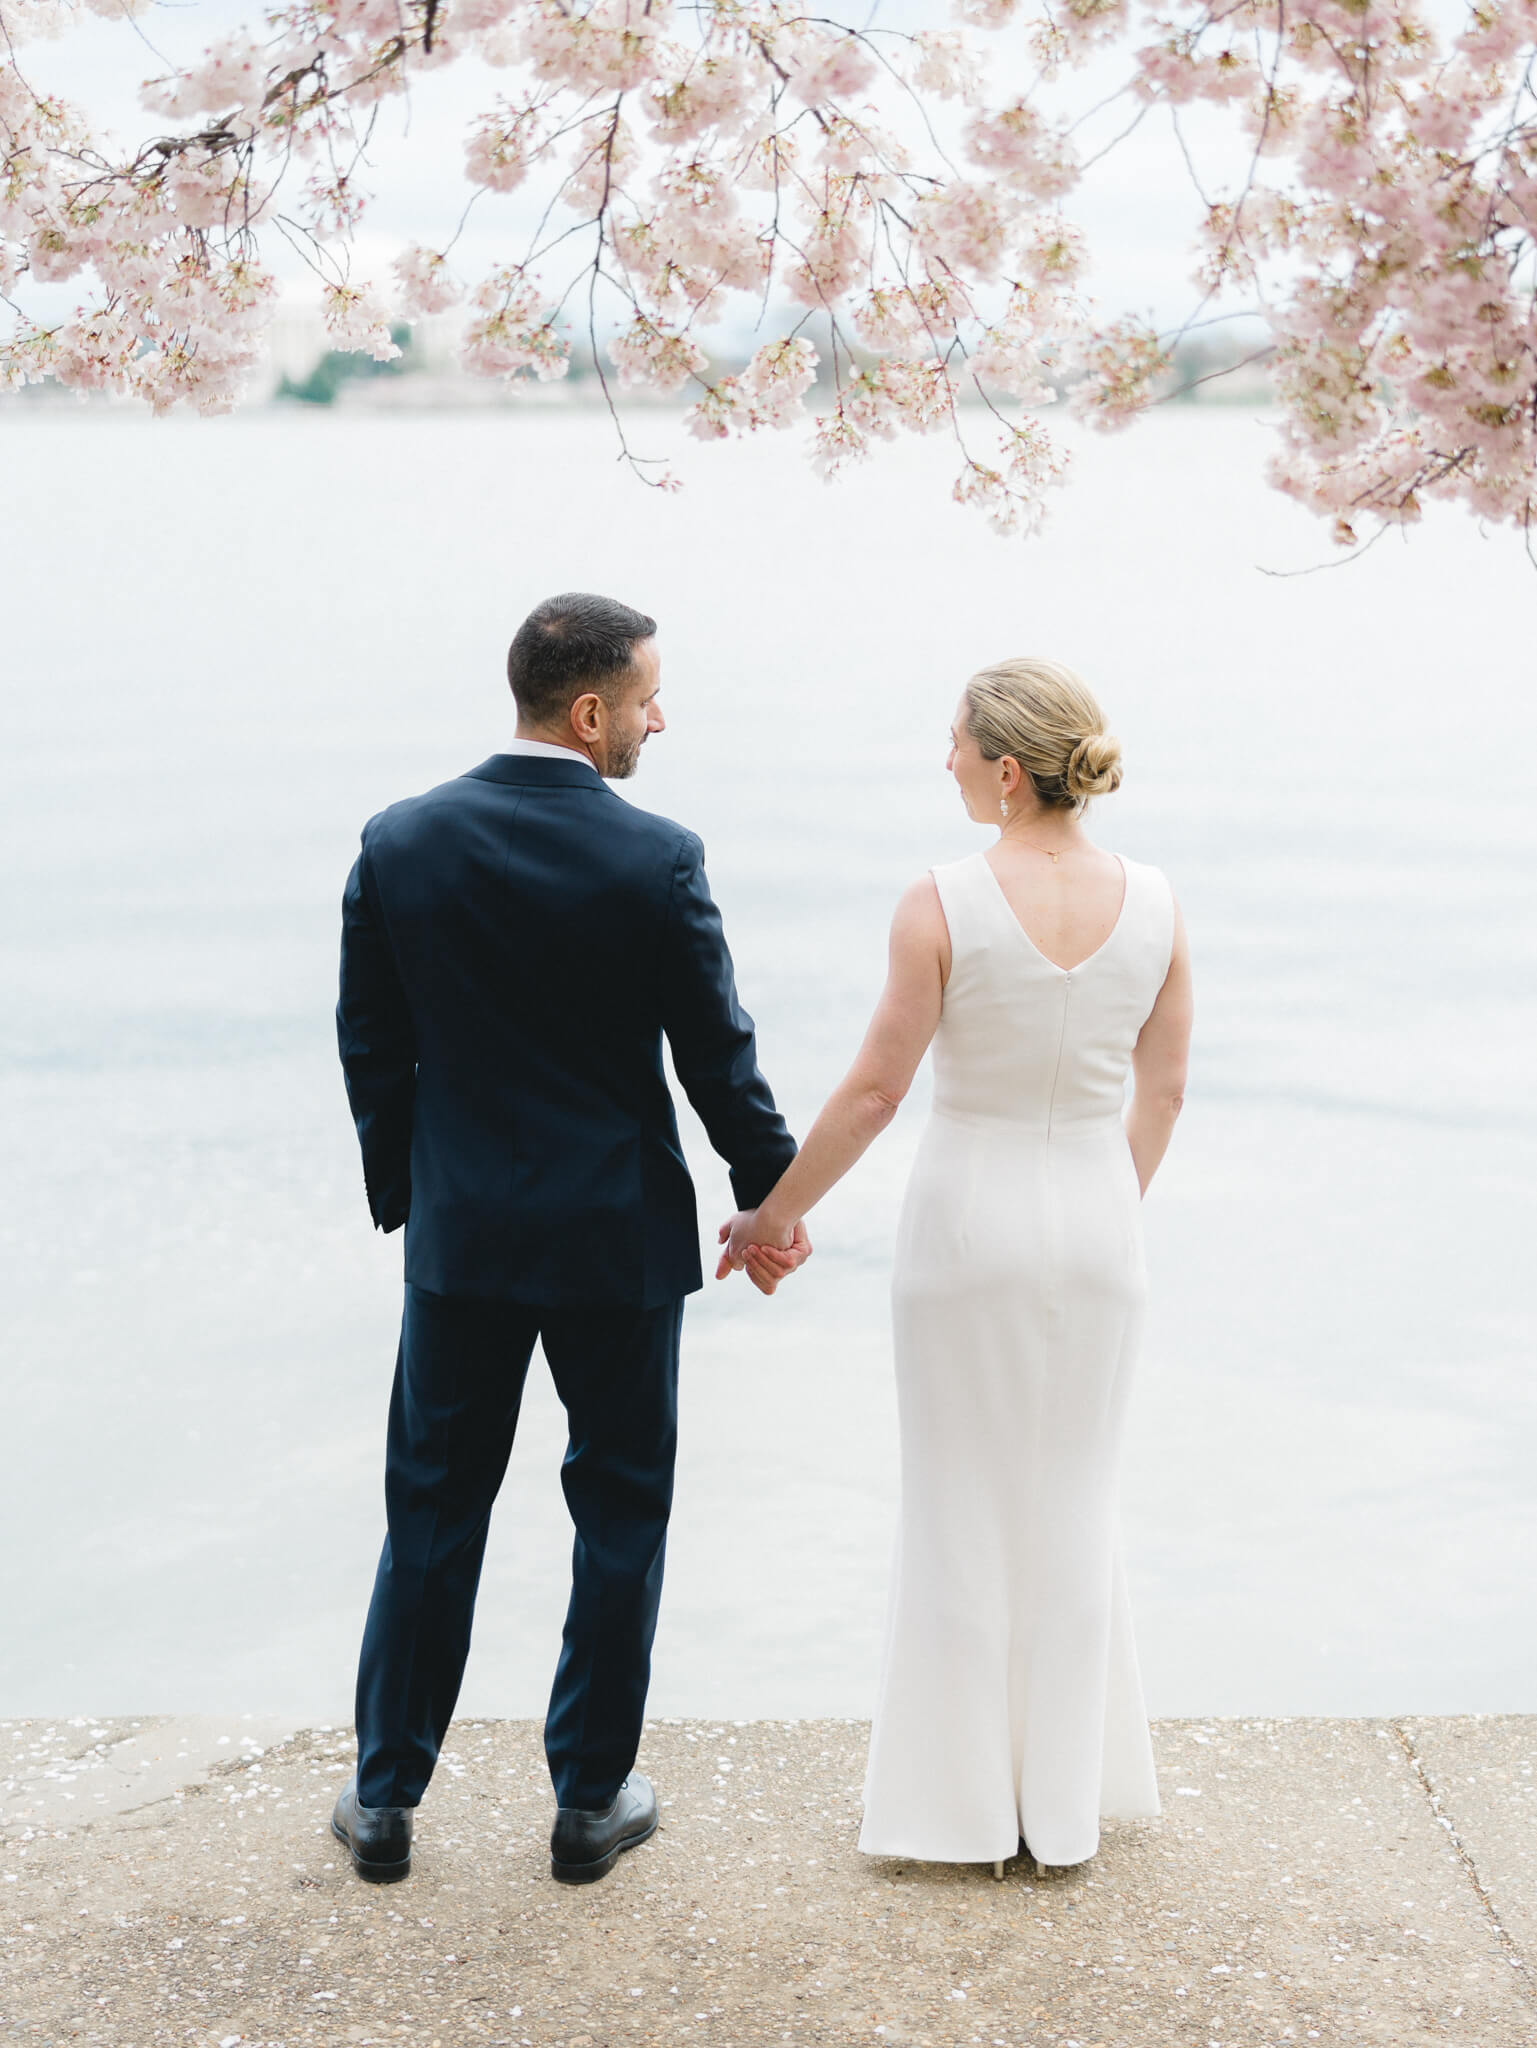 A bride and groom with their backs turned looking out over the tidal basin with cherry blossoms above them